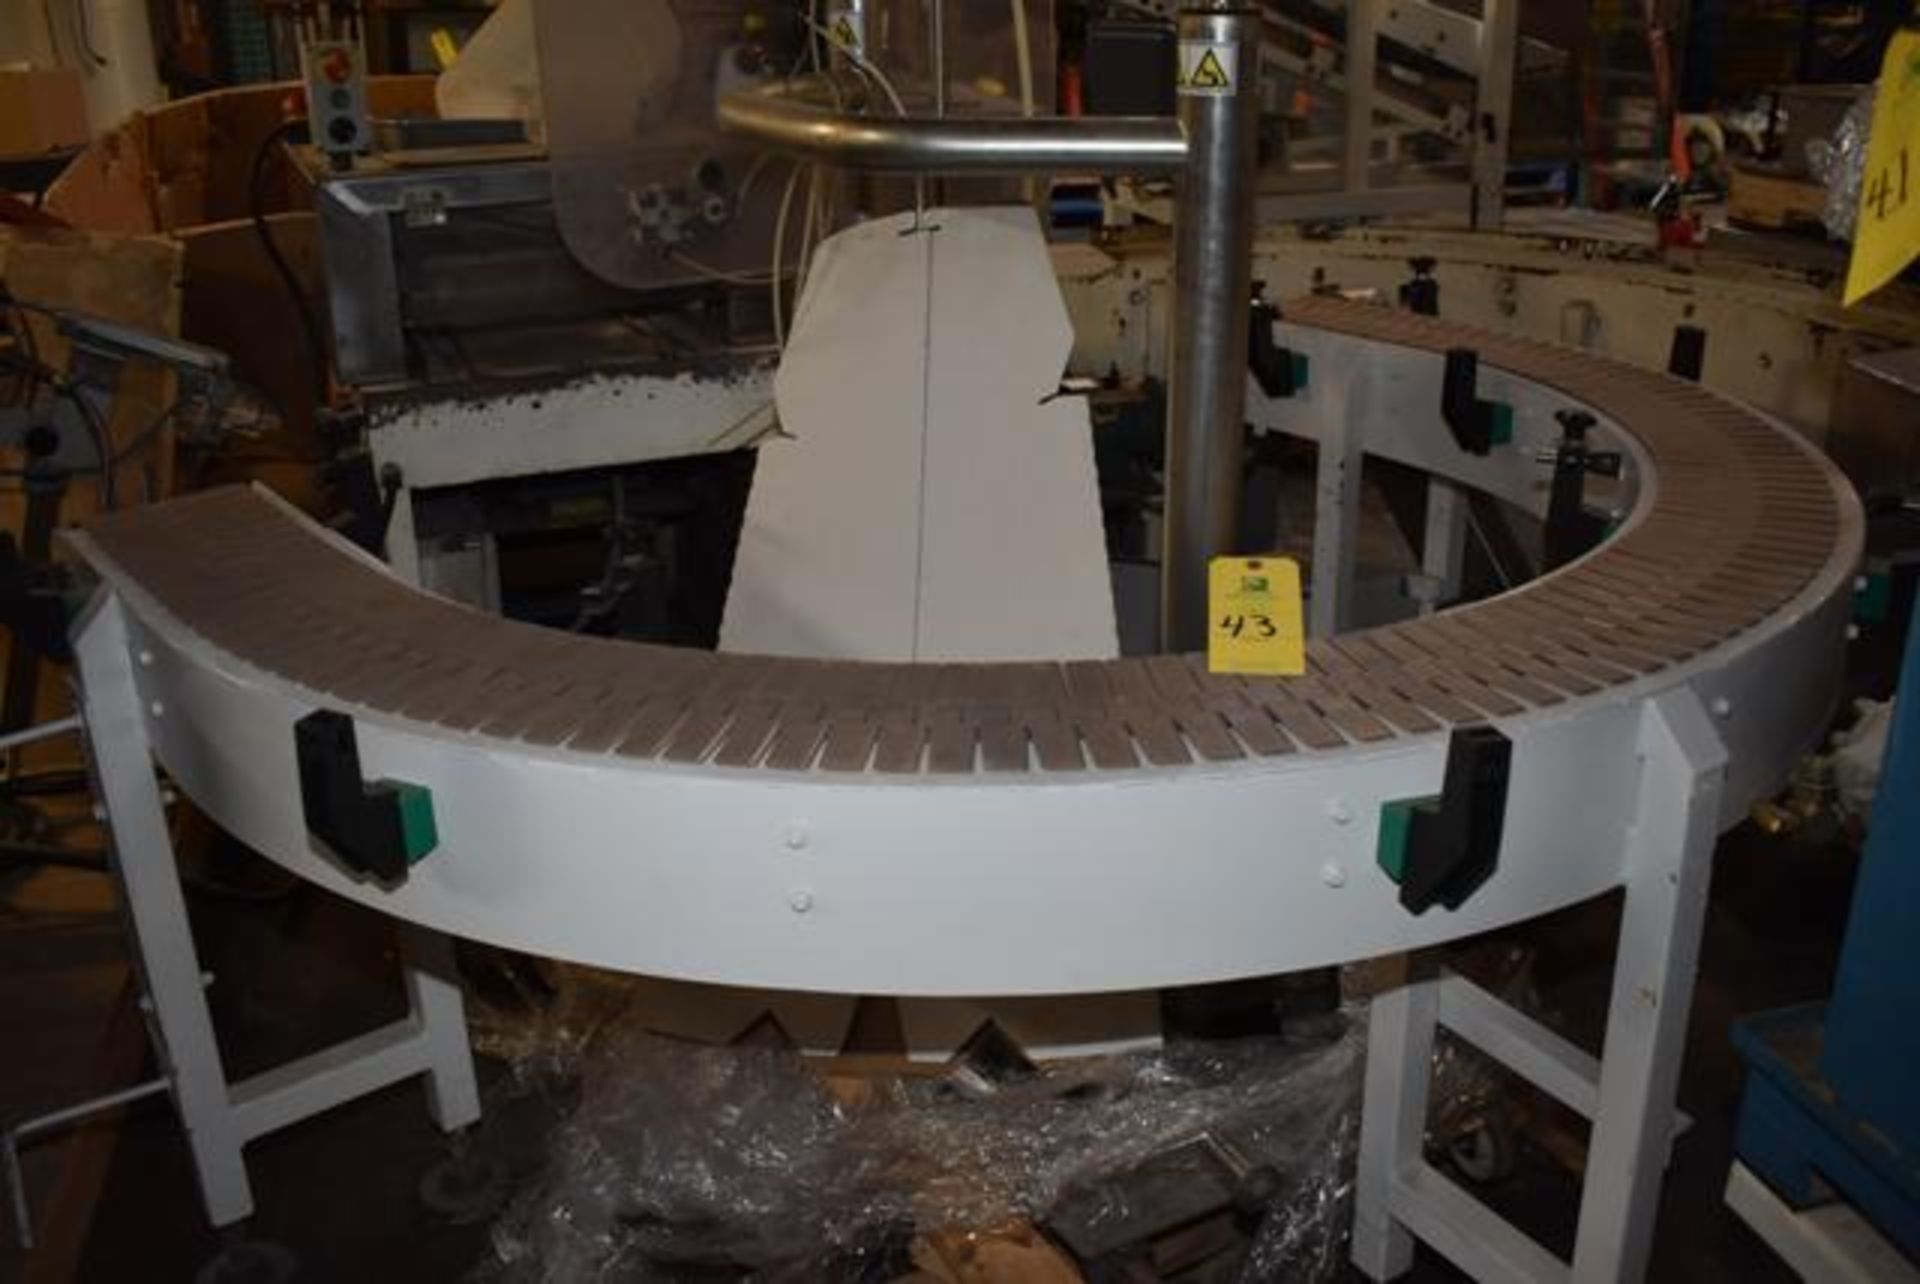 Motorized 180 degree Motorized Belt Conveyor, Approx. 12' Length x 8" Wide Belt | Required Rigging - Image 2 of 4